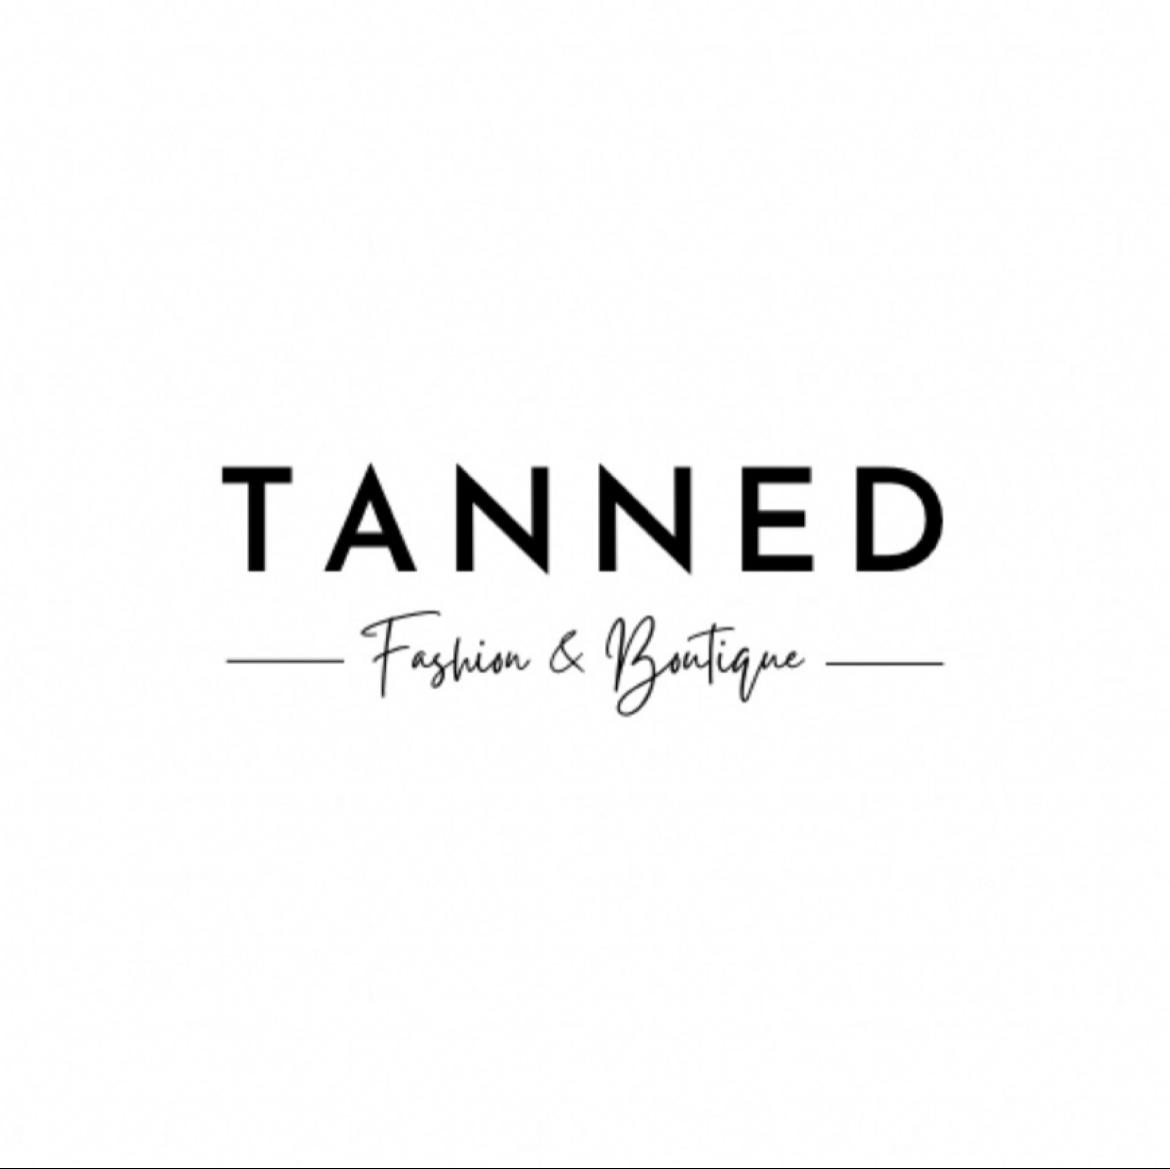 Tanned shop